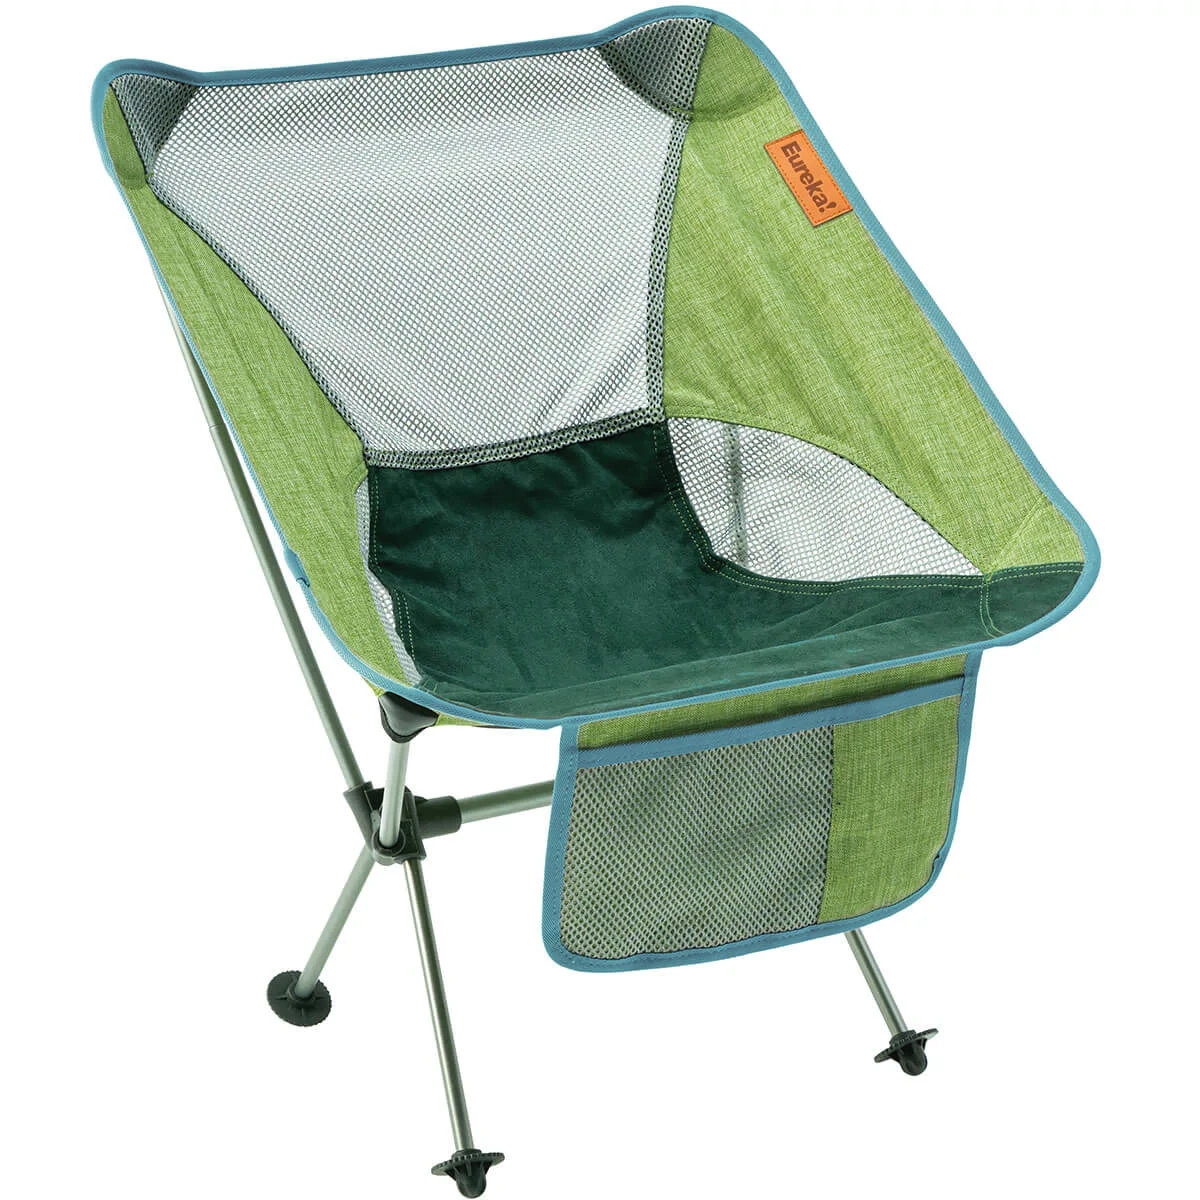 Eureka! Tagalong Lite Camp Chair with pack pocket out